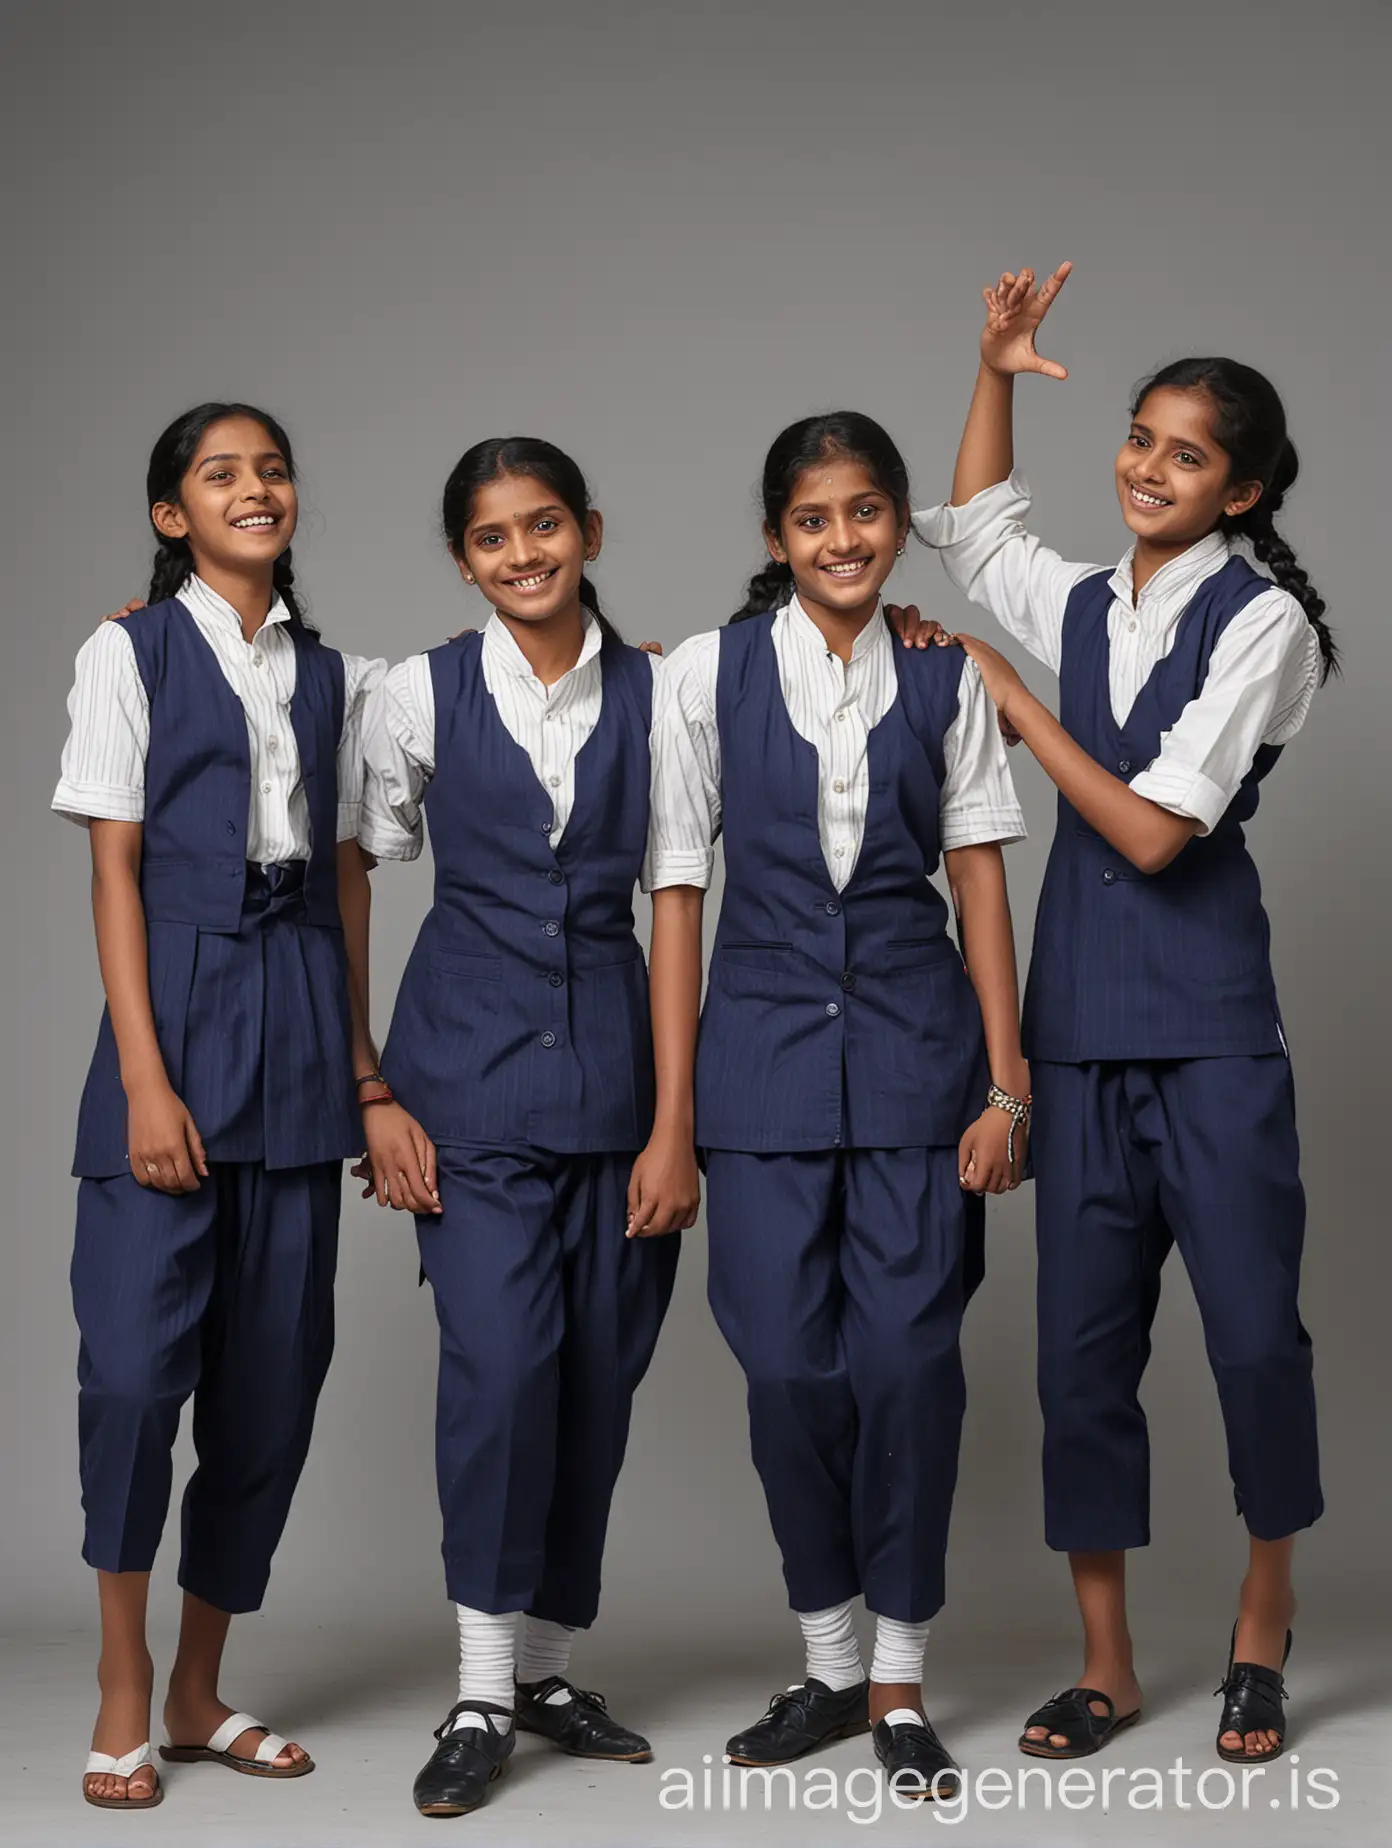 In Kerala, at least 5 teenage students celebrate the success of their 10th grade pass with dancing and jumping.

School uniform: dark blue pants.
Well tied dark blue sleeveless short jackets over long kurtas with white and light blue stripes and a simple mandarin collar.
dark blue pants.
White background.